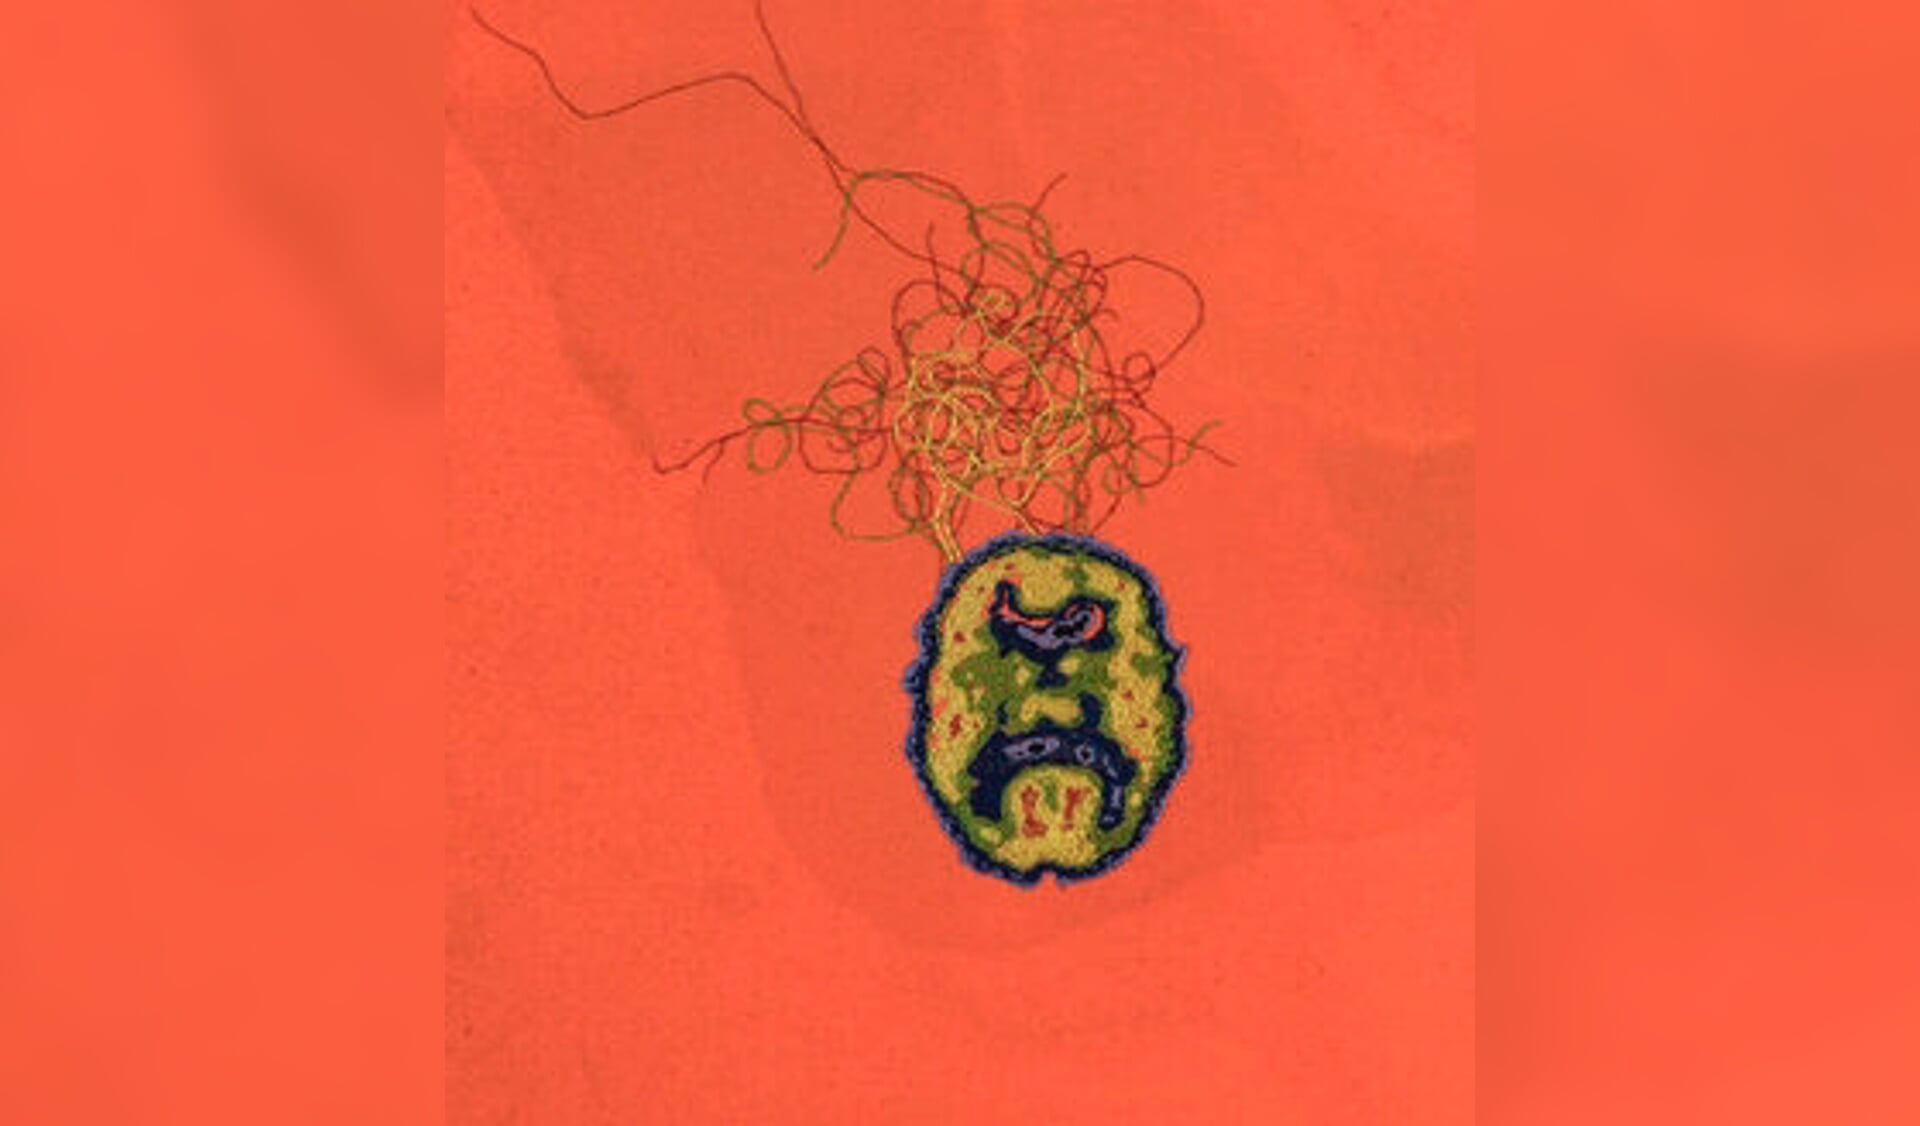 Detail of Schizophrenia Stain (chatter).